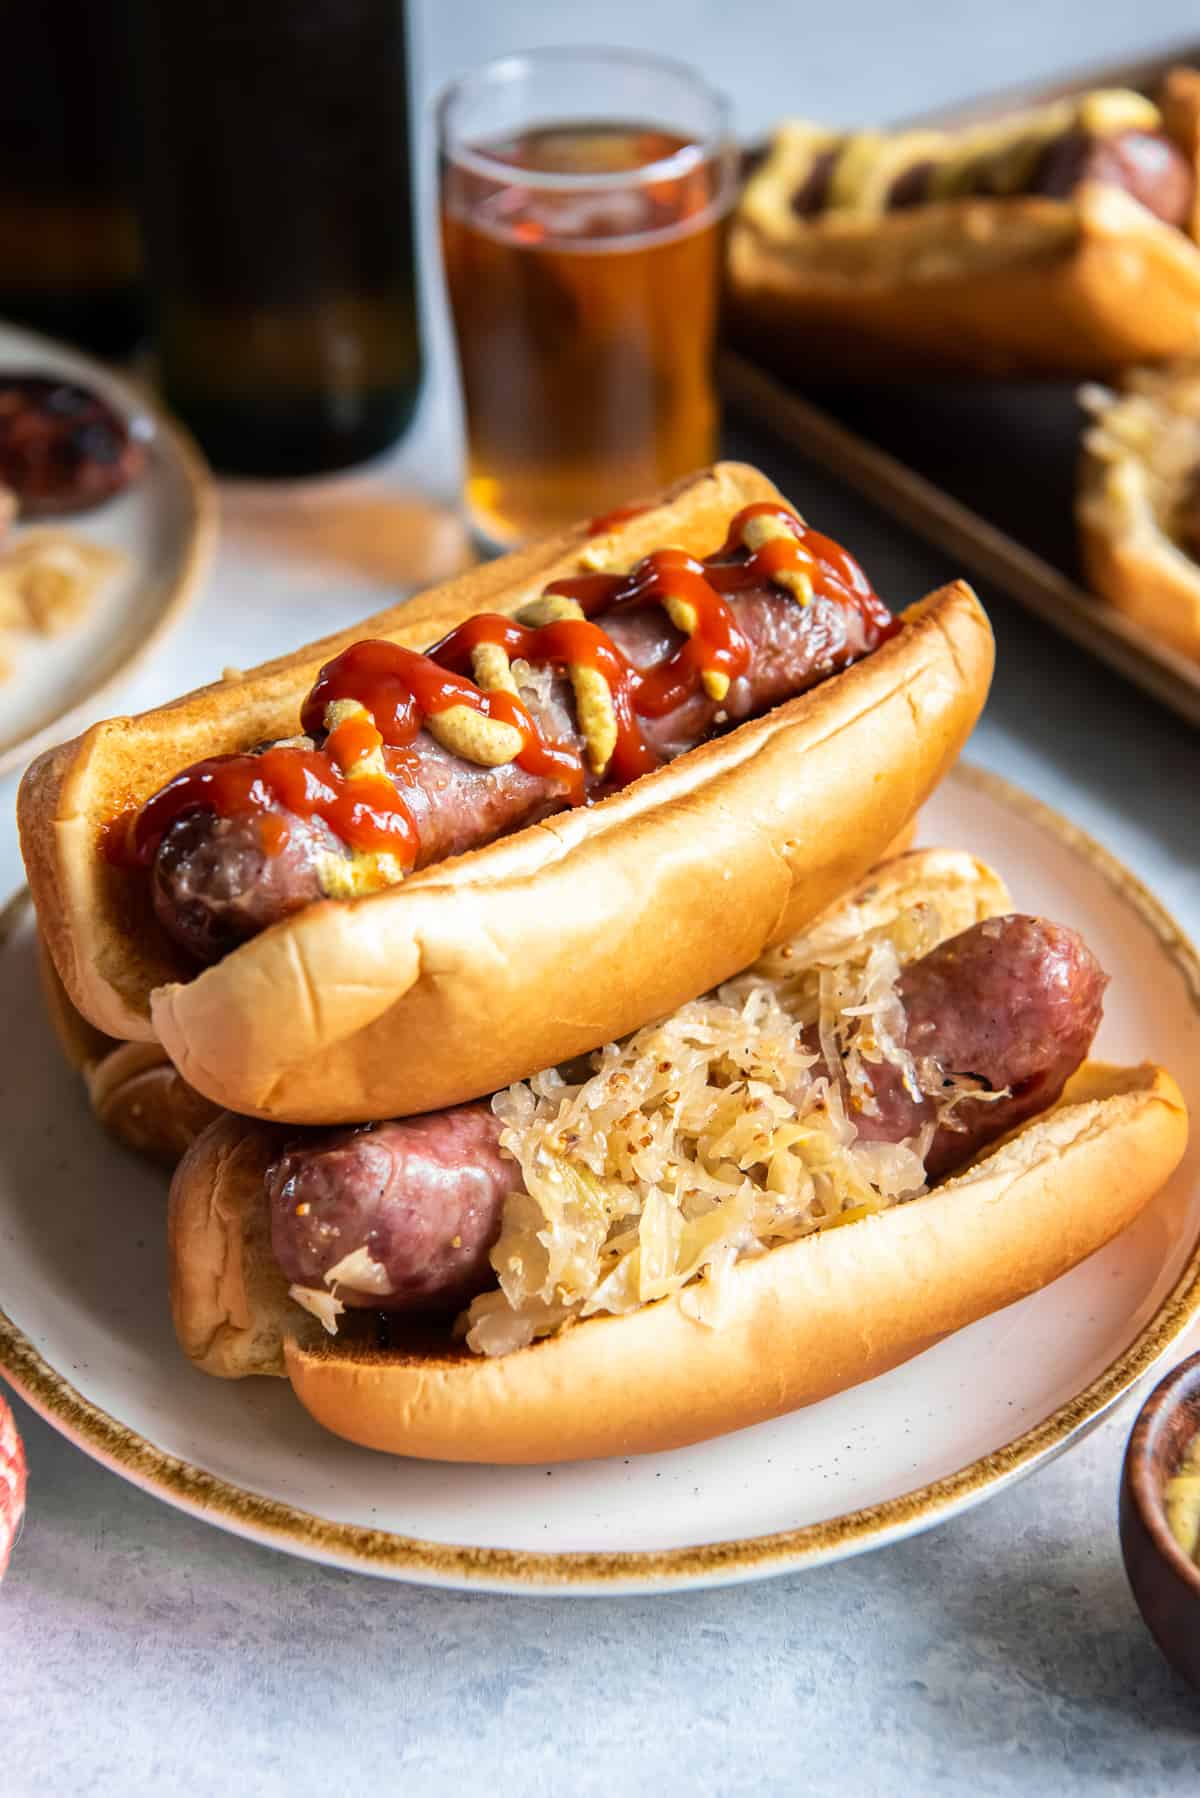 Bratwurst and sauerkraut in buns topped with ketchup stacked on top of each other on a plate.